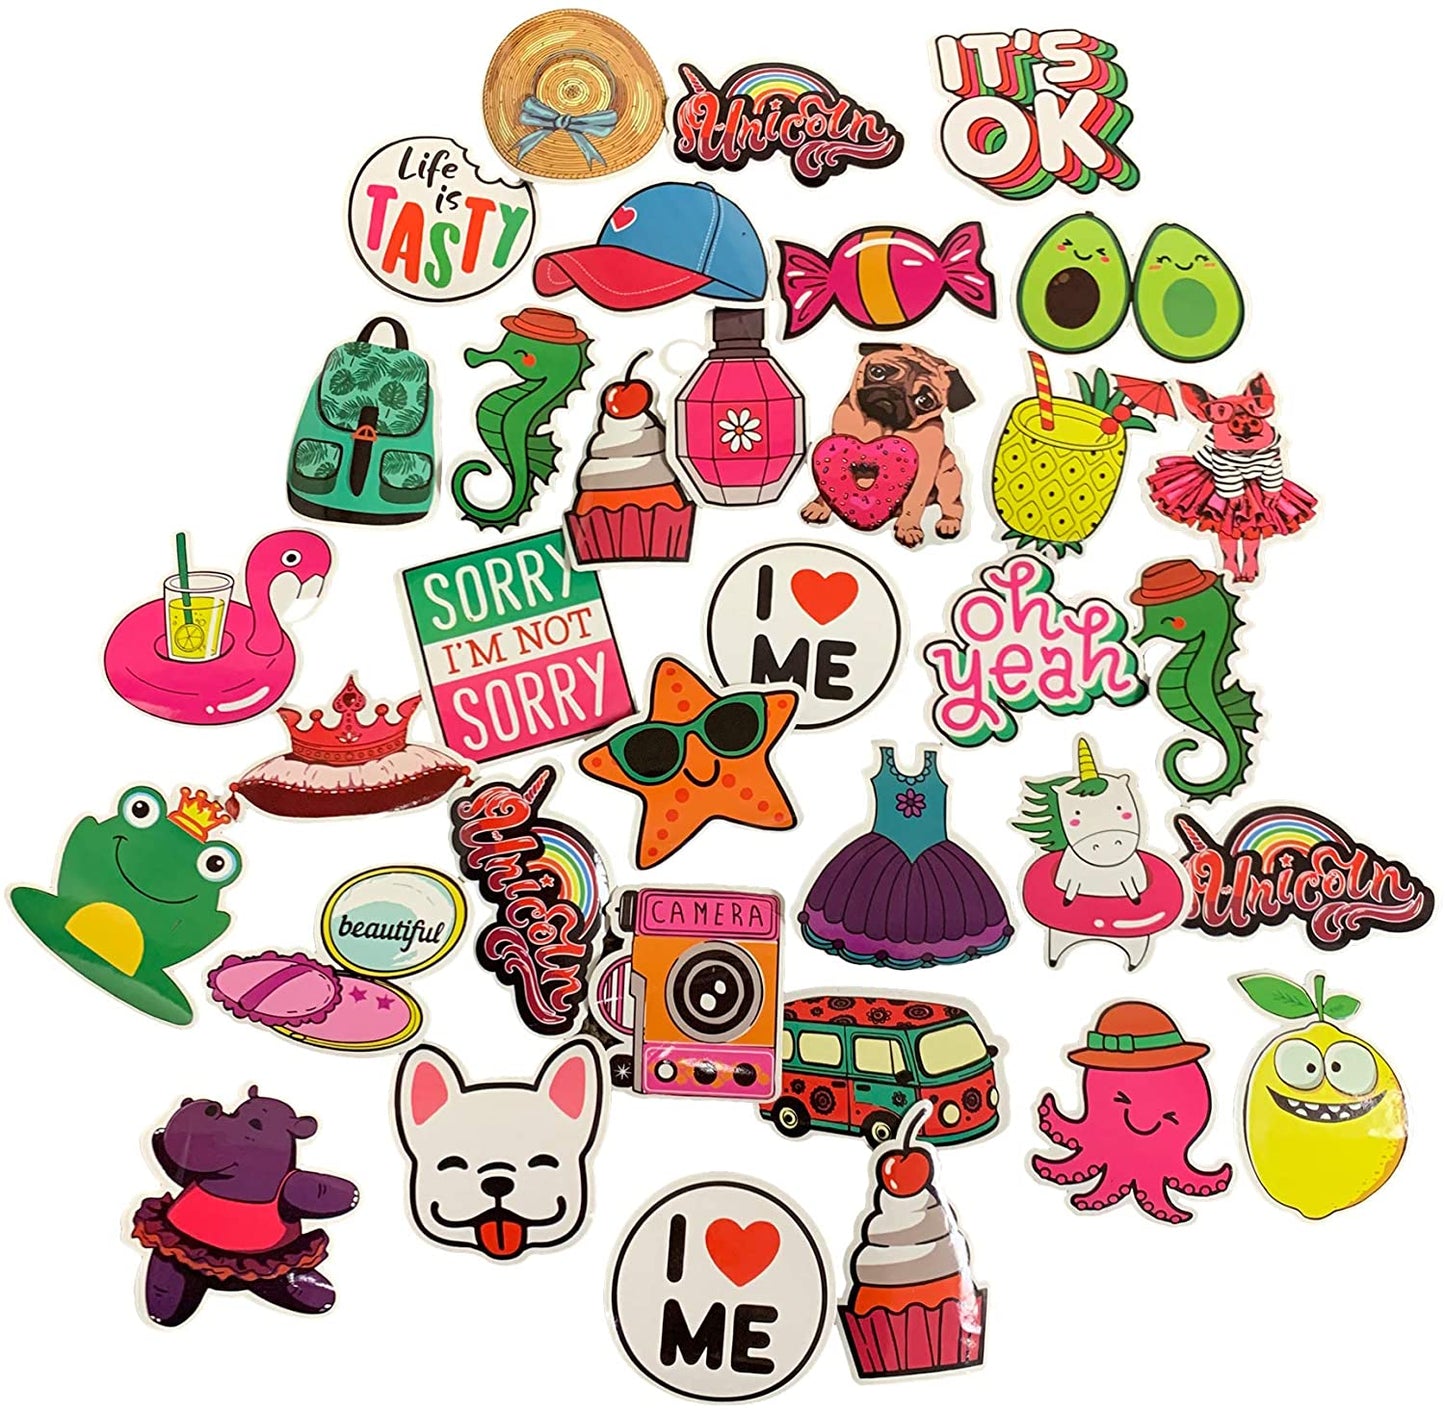 35 pcs. Stickers for hydro flask, Water Bottle, Laptop, Computer, Cellphone, Gadget, Skateboard 6.99 freeshipping - Kool Products